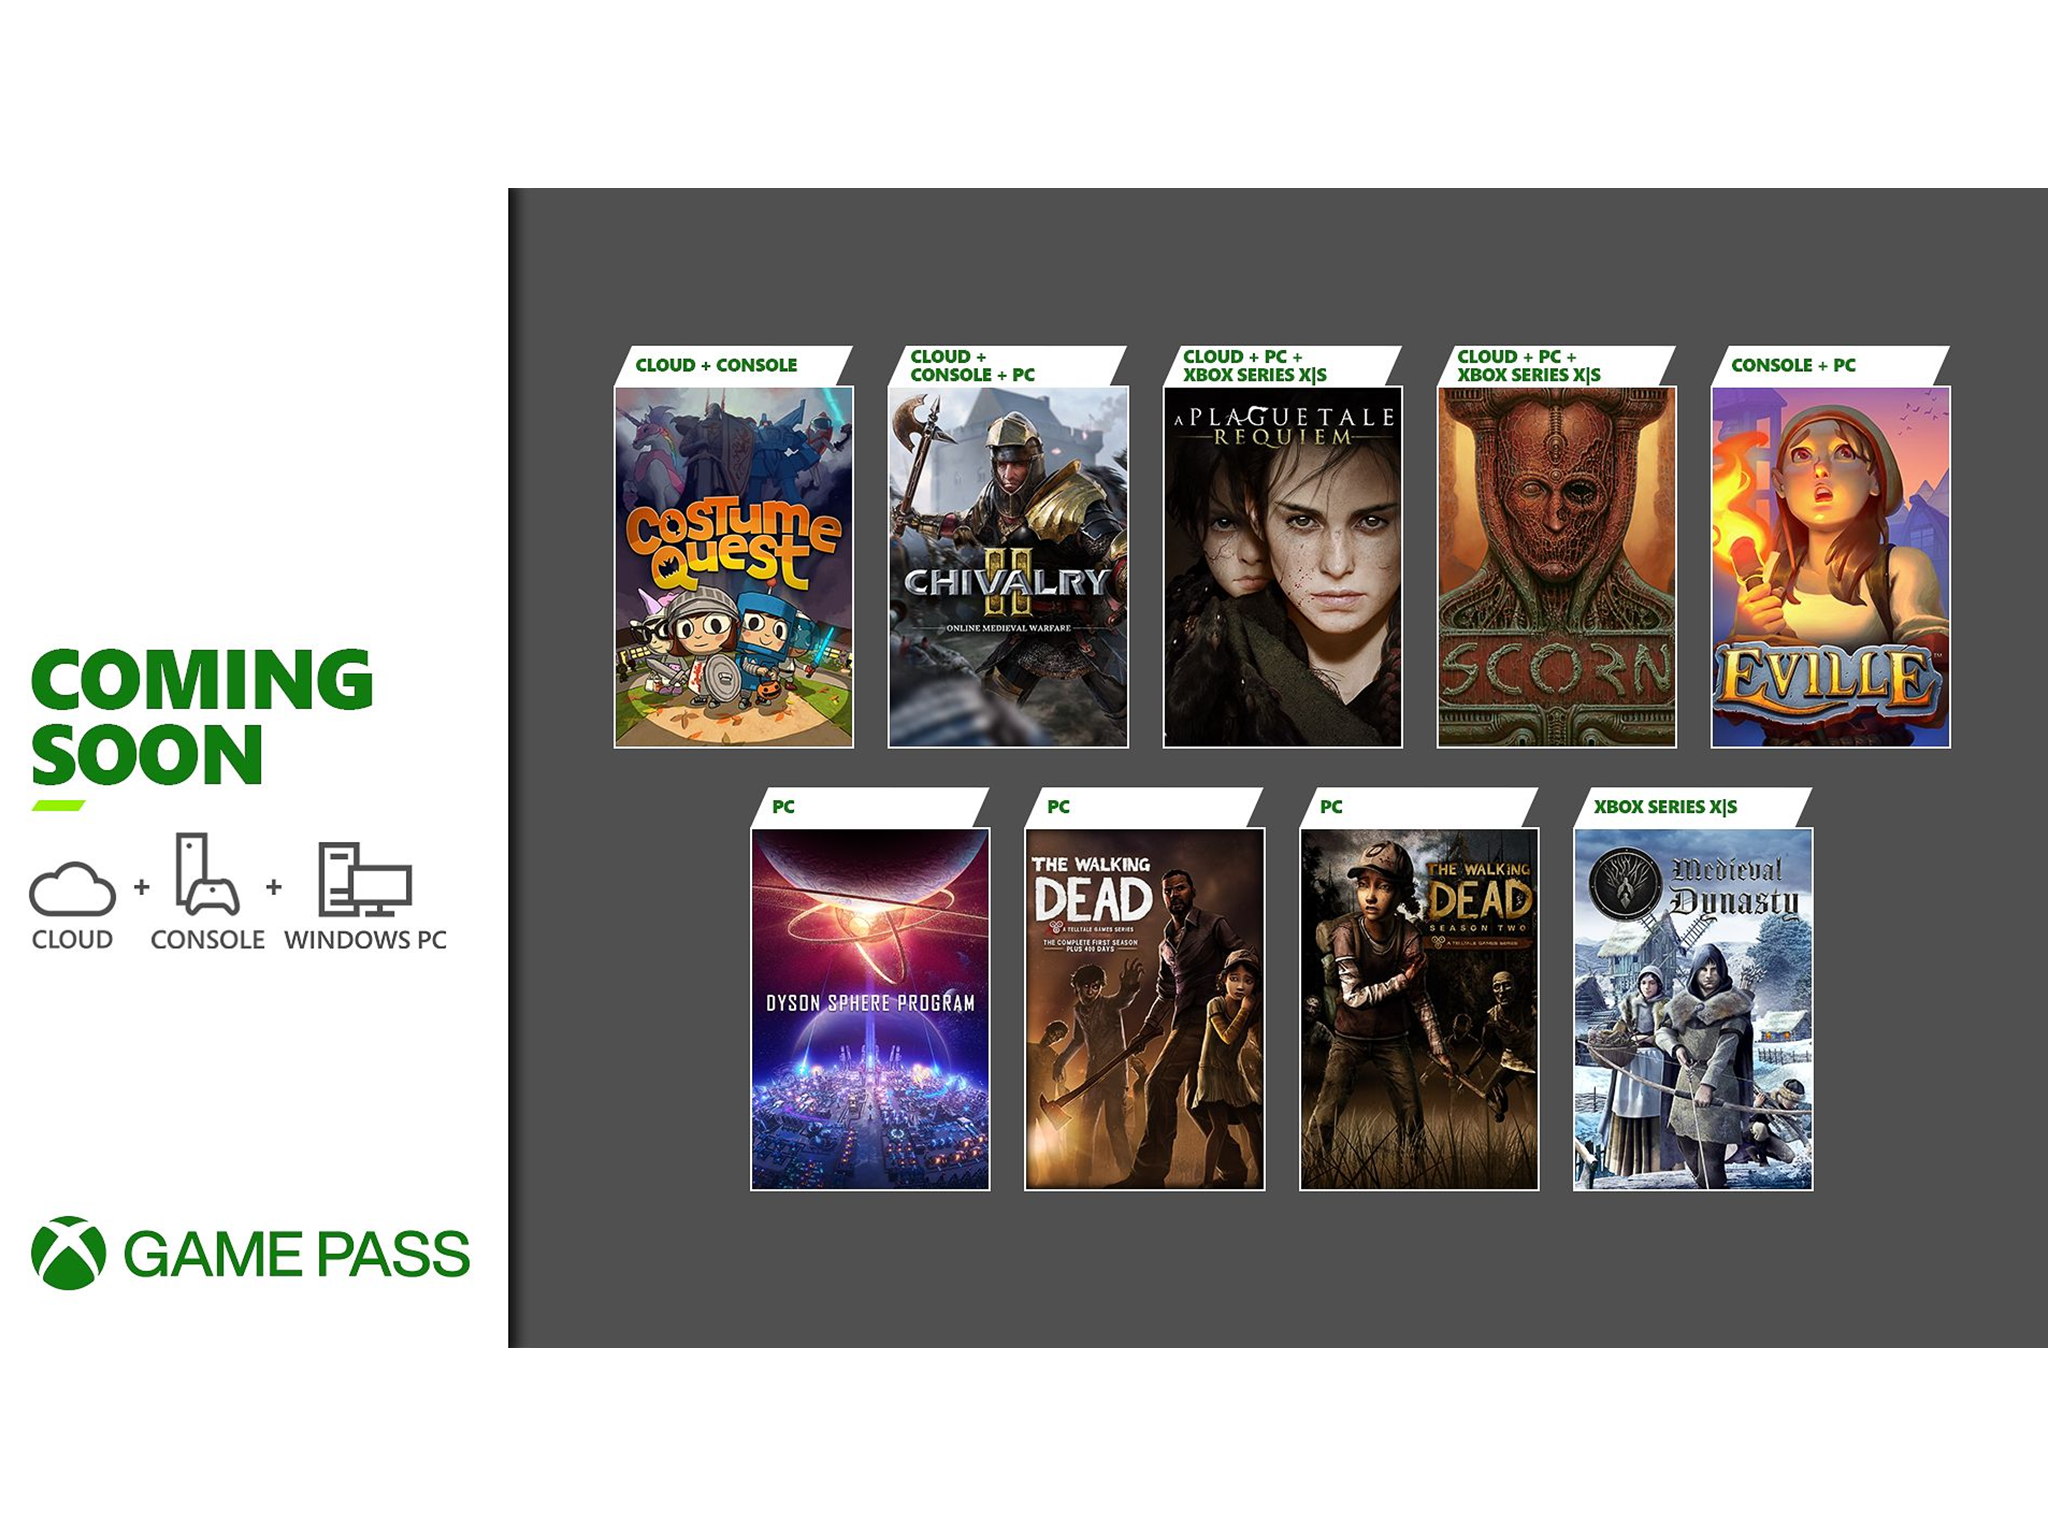 Get 3 Months of Xbox Game Pass for PC for $1! A Plague Tale